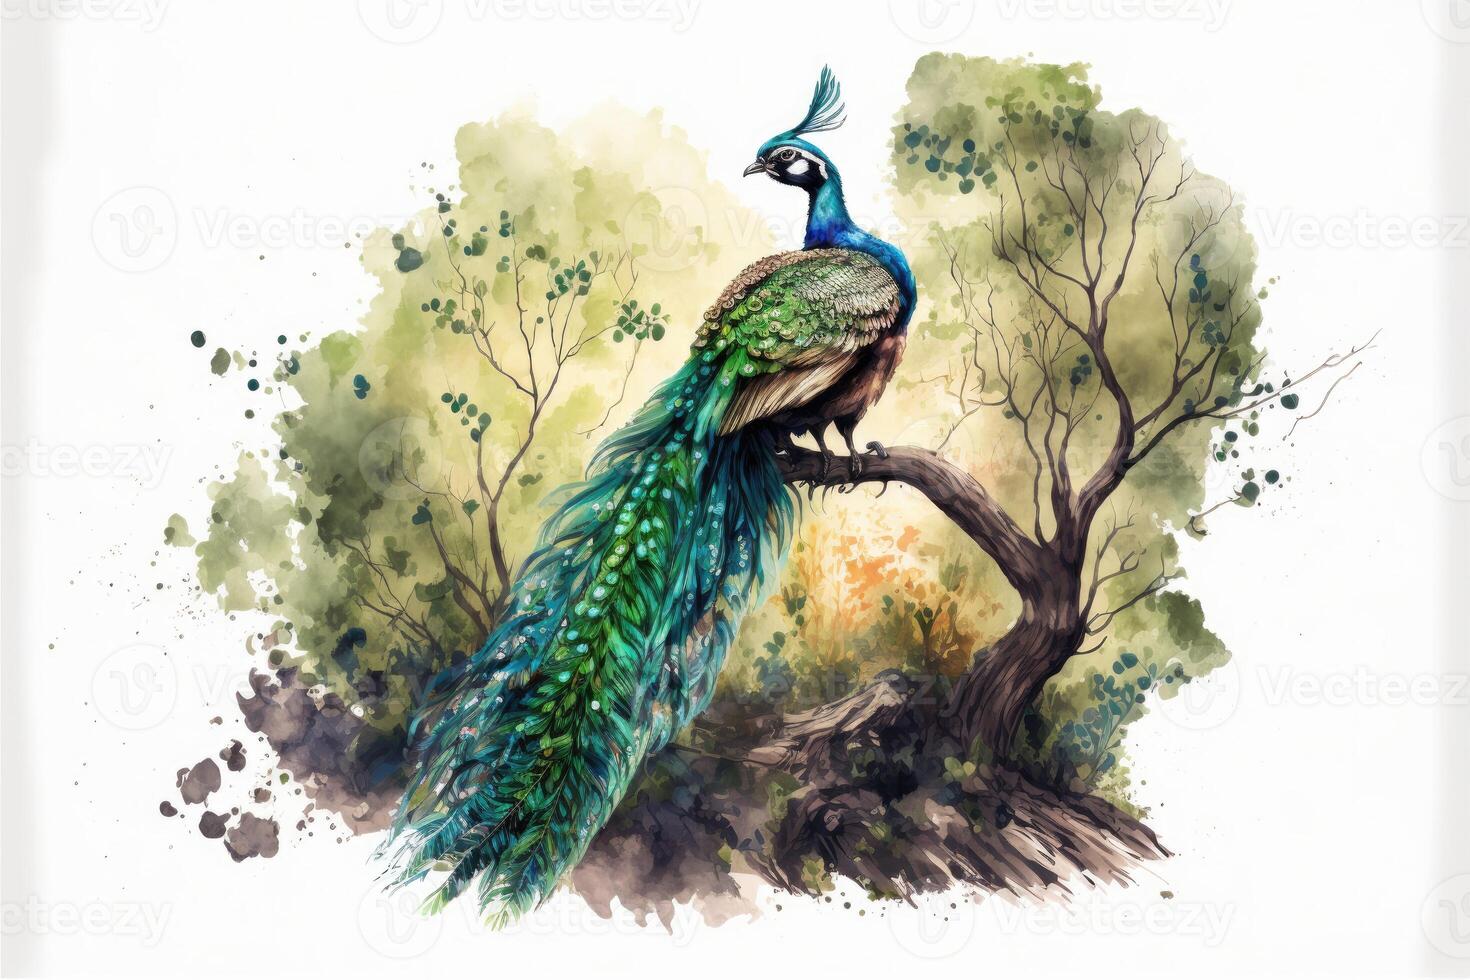 Cute peacock spreading wings in the forest. Watercolor painting of cute bird animals. photo